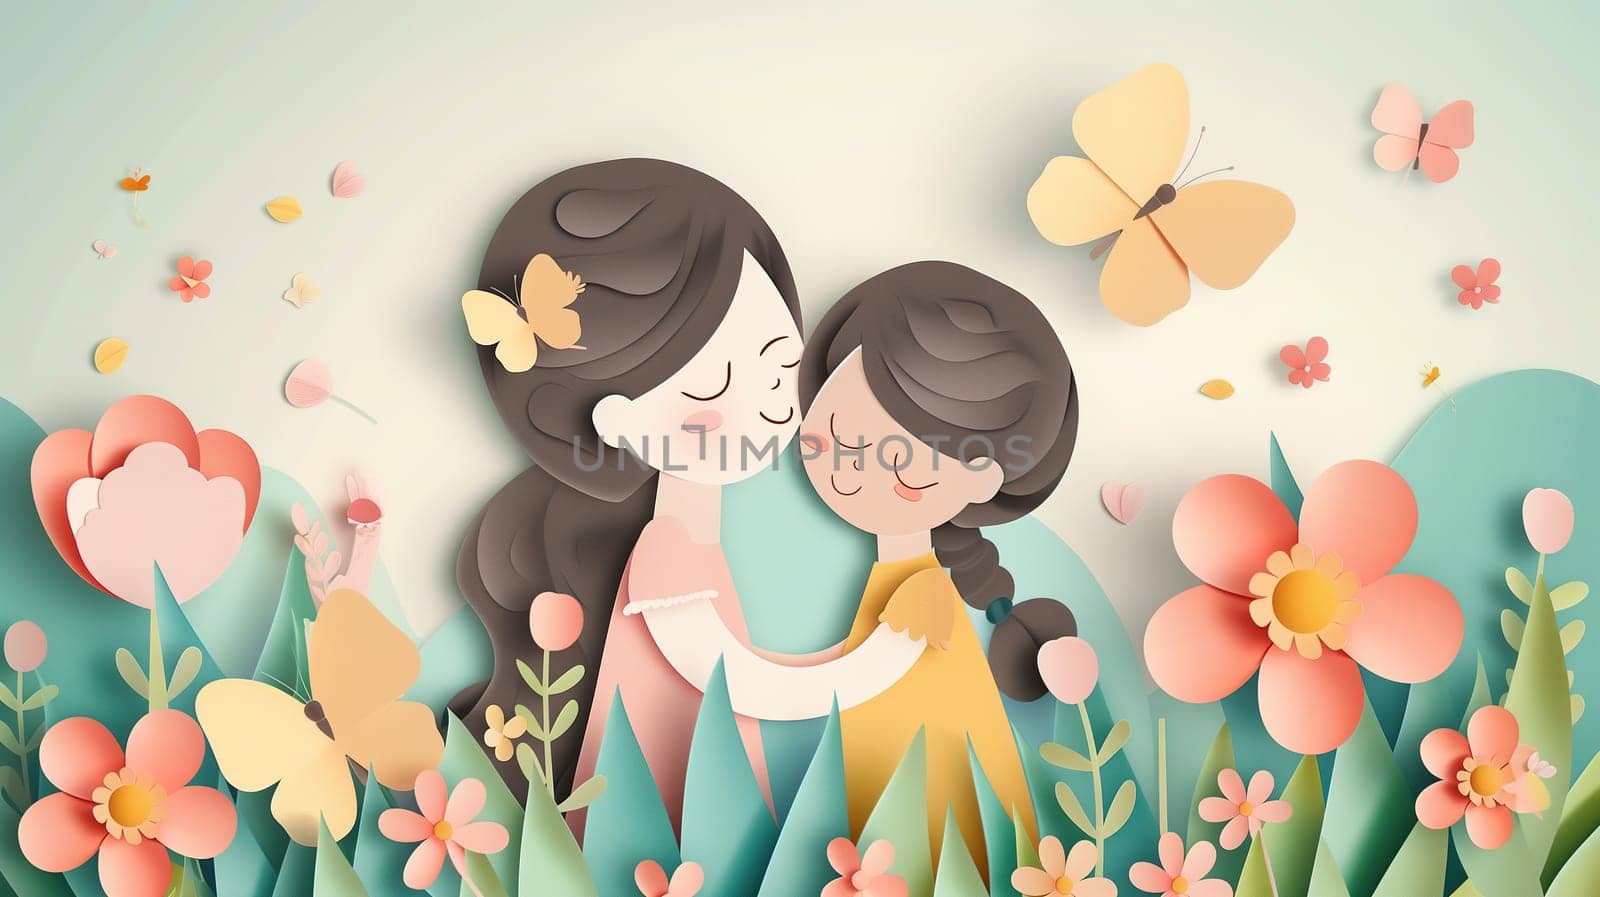 Two women embrace each other in the midst of a vibrant field of blooming flowers. Their arms are wrapped around each other, showing a warm display of affection and connection.